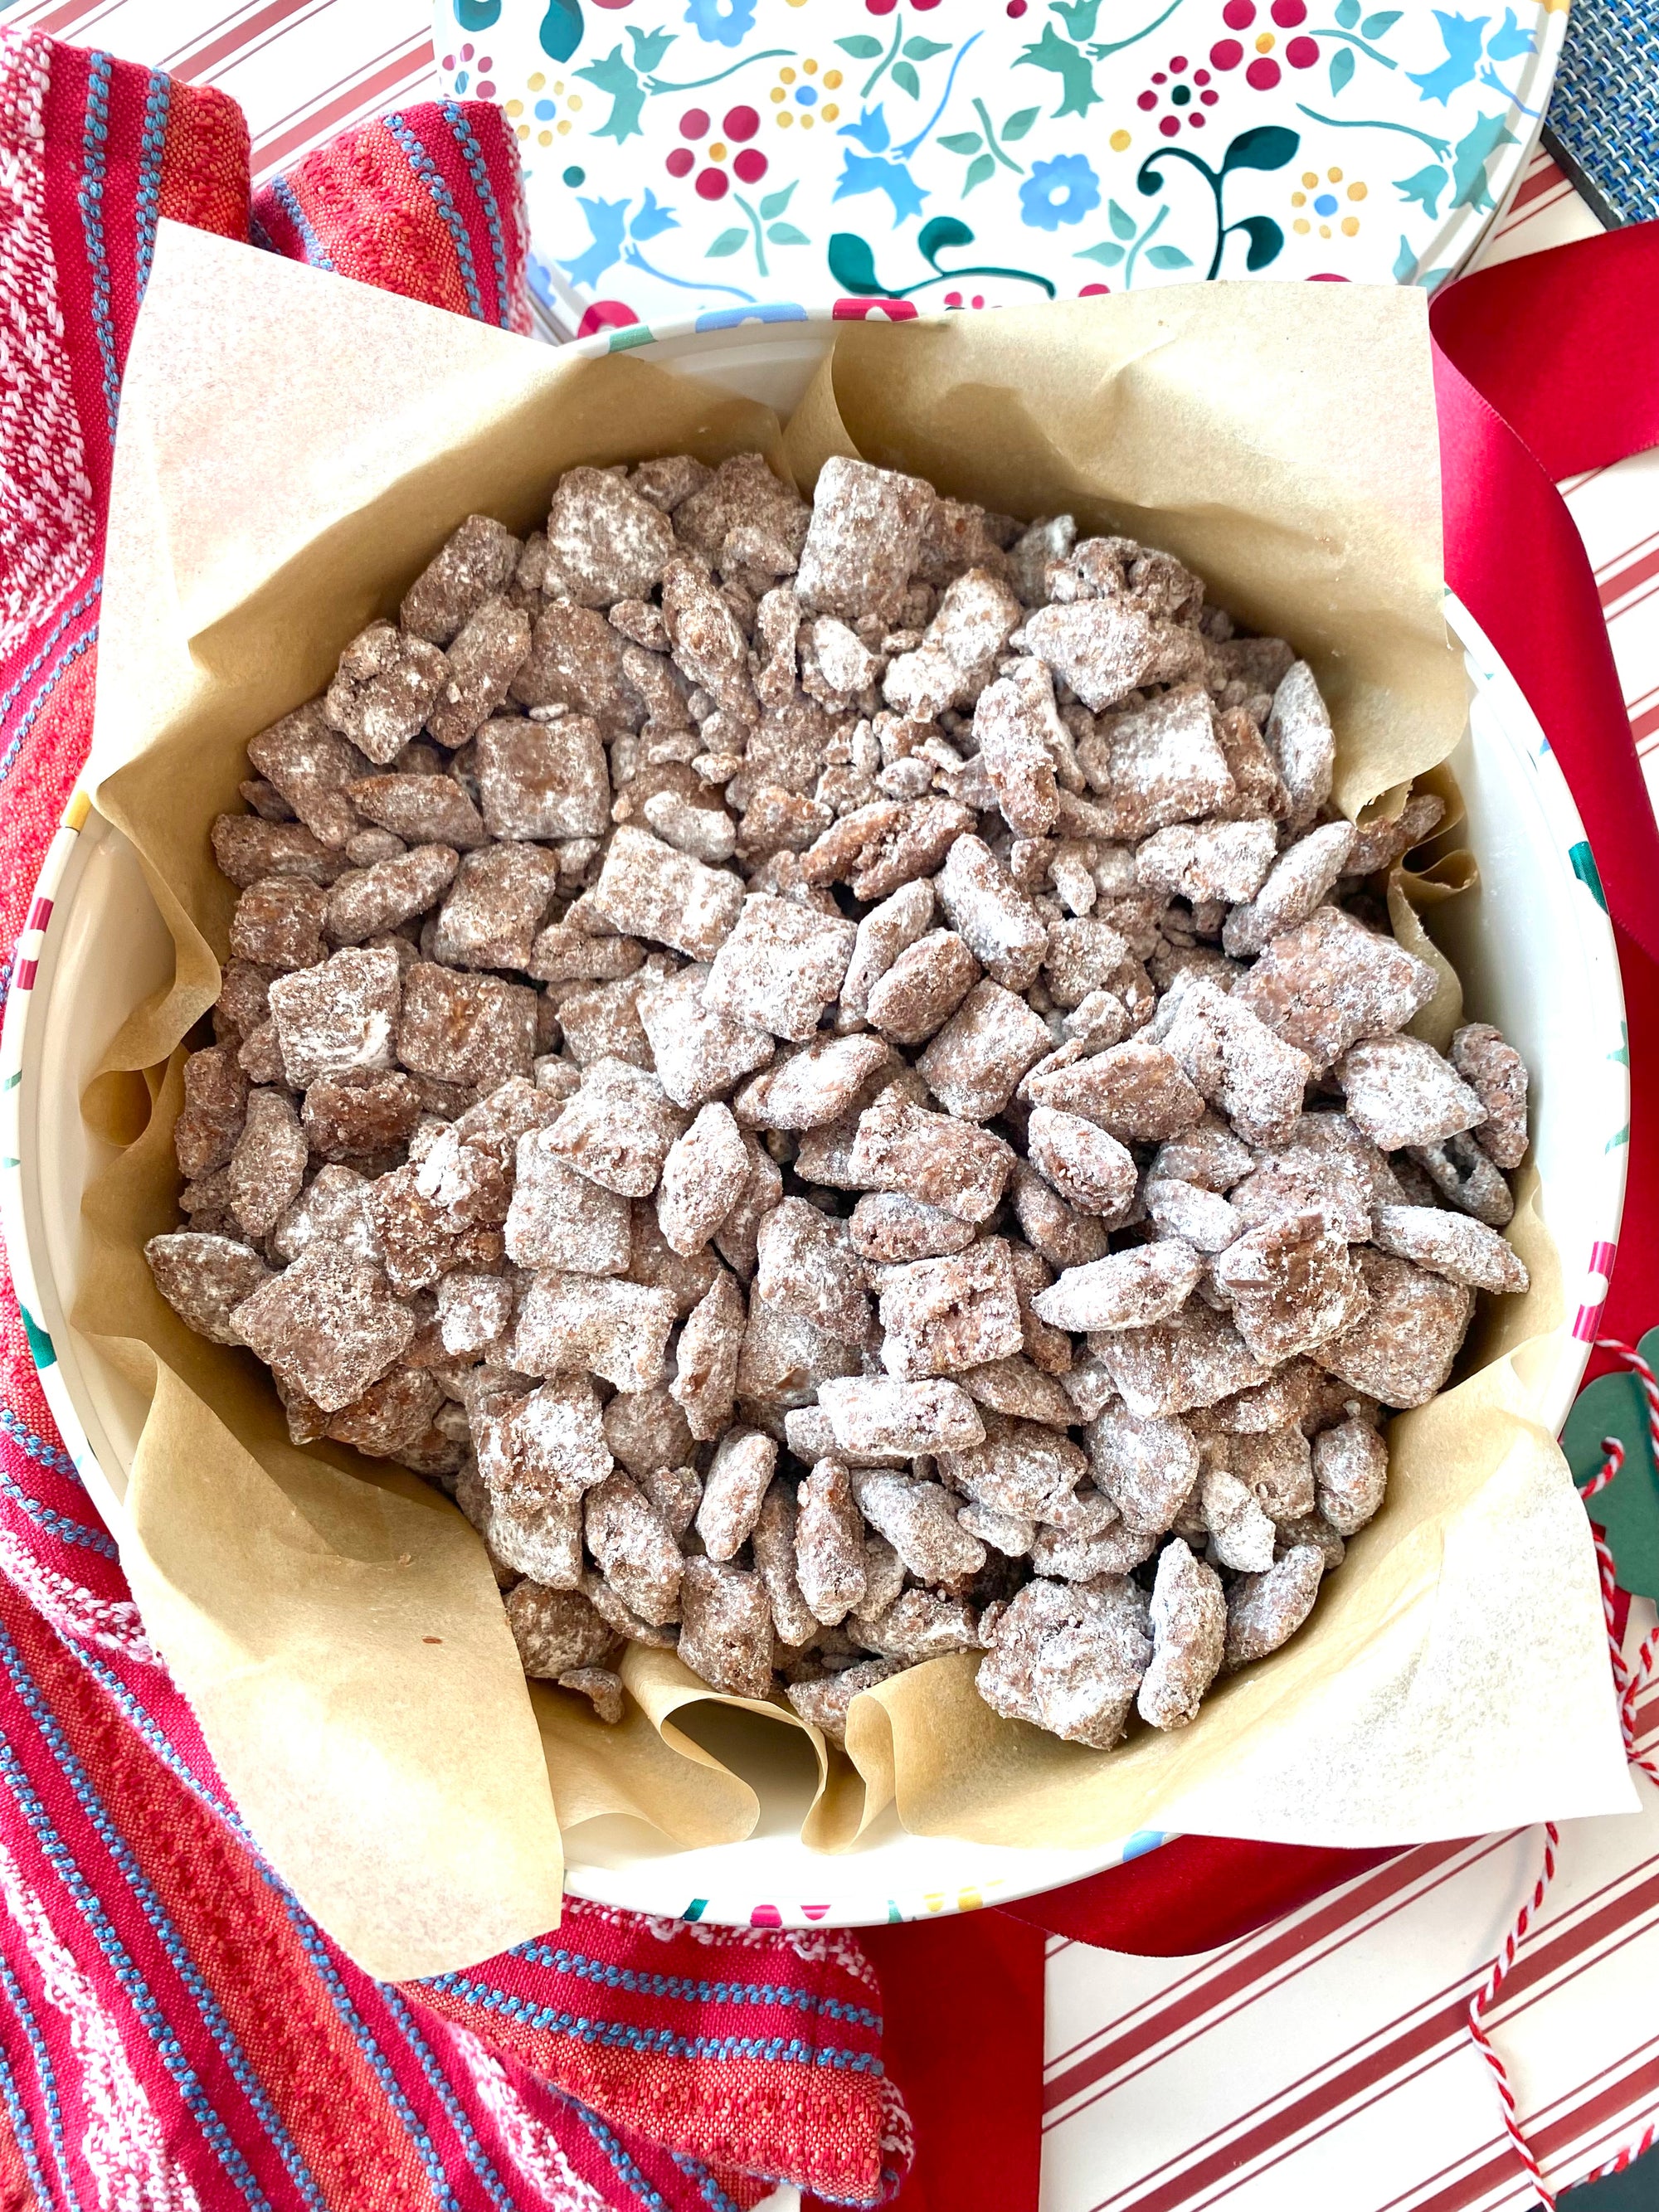 Puppy Chow - and no, this isn't for the Dogs!